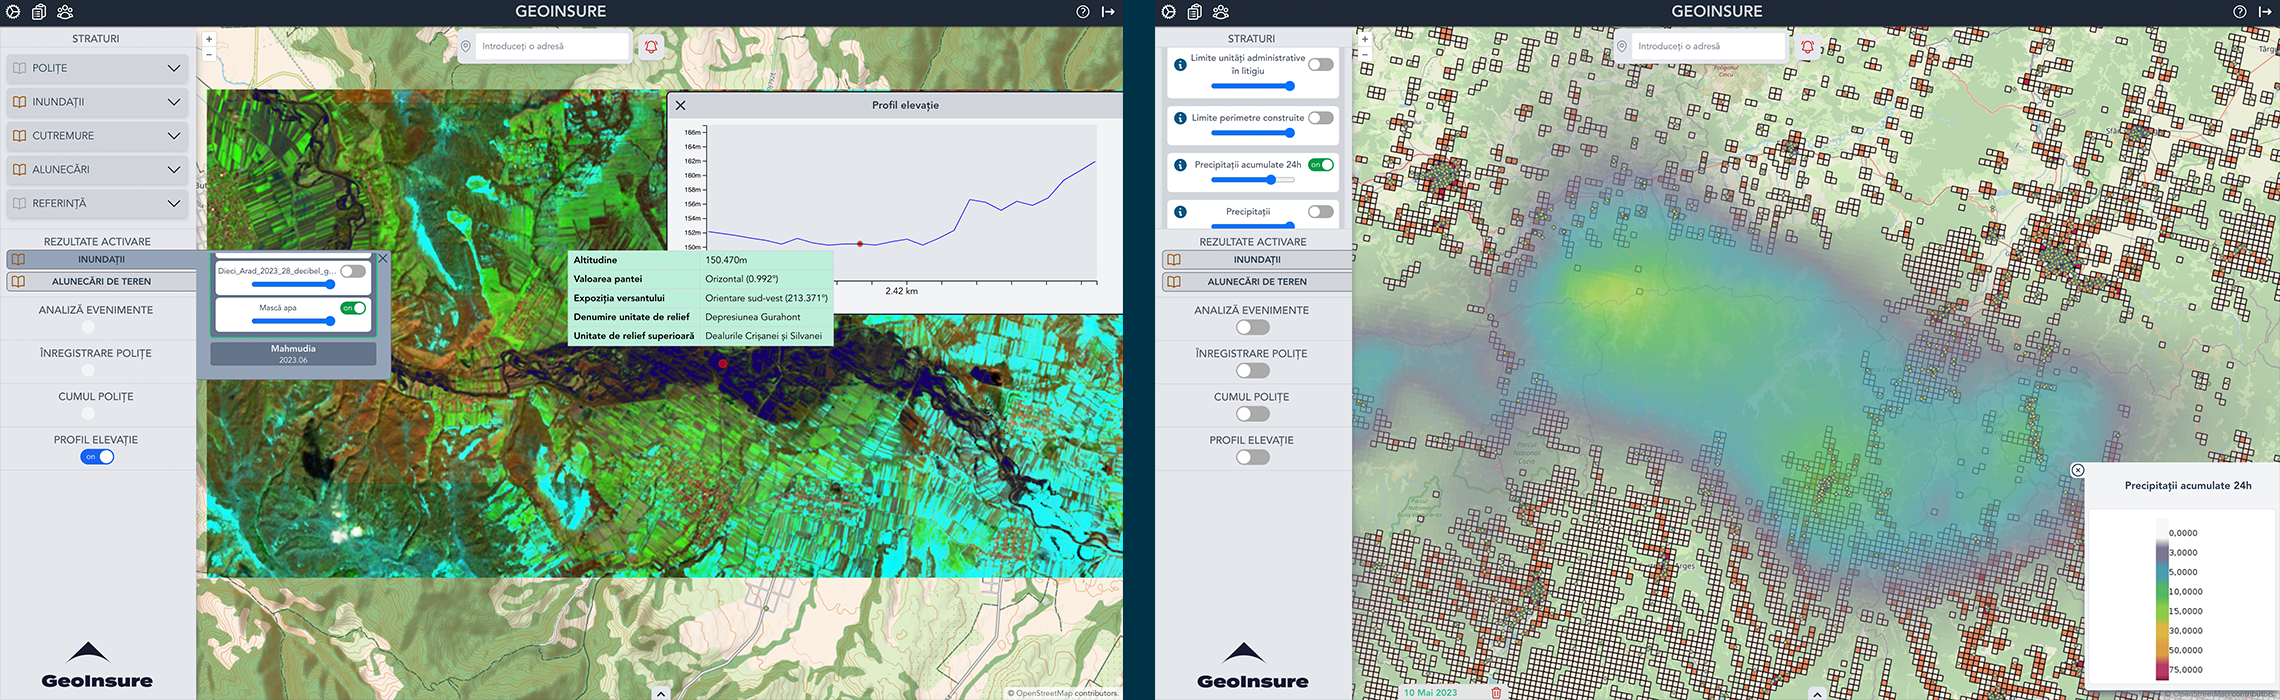 GeoInsure interface showing flooding and precipitation maps